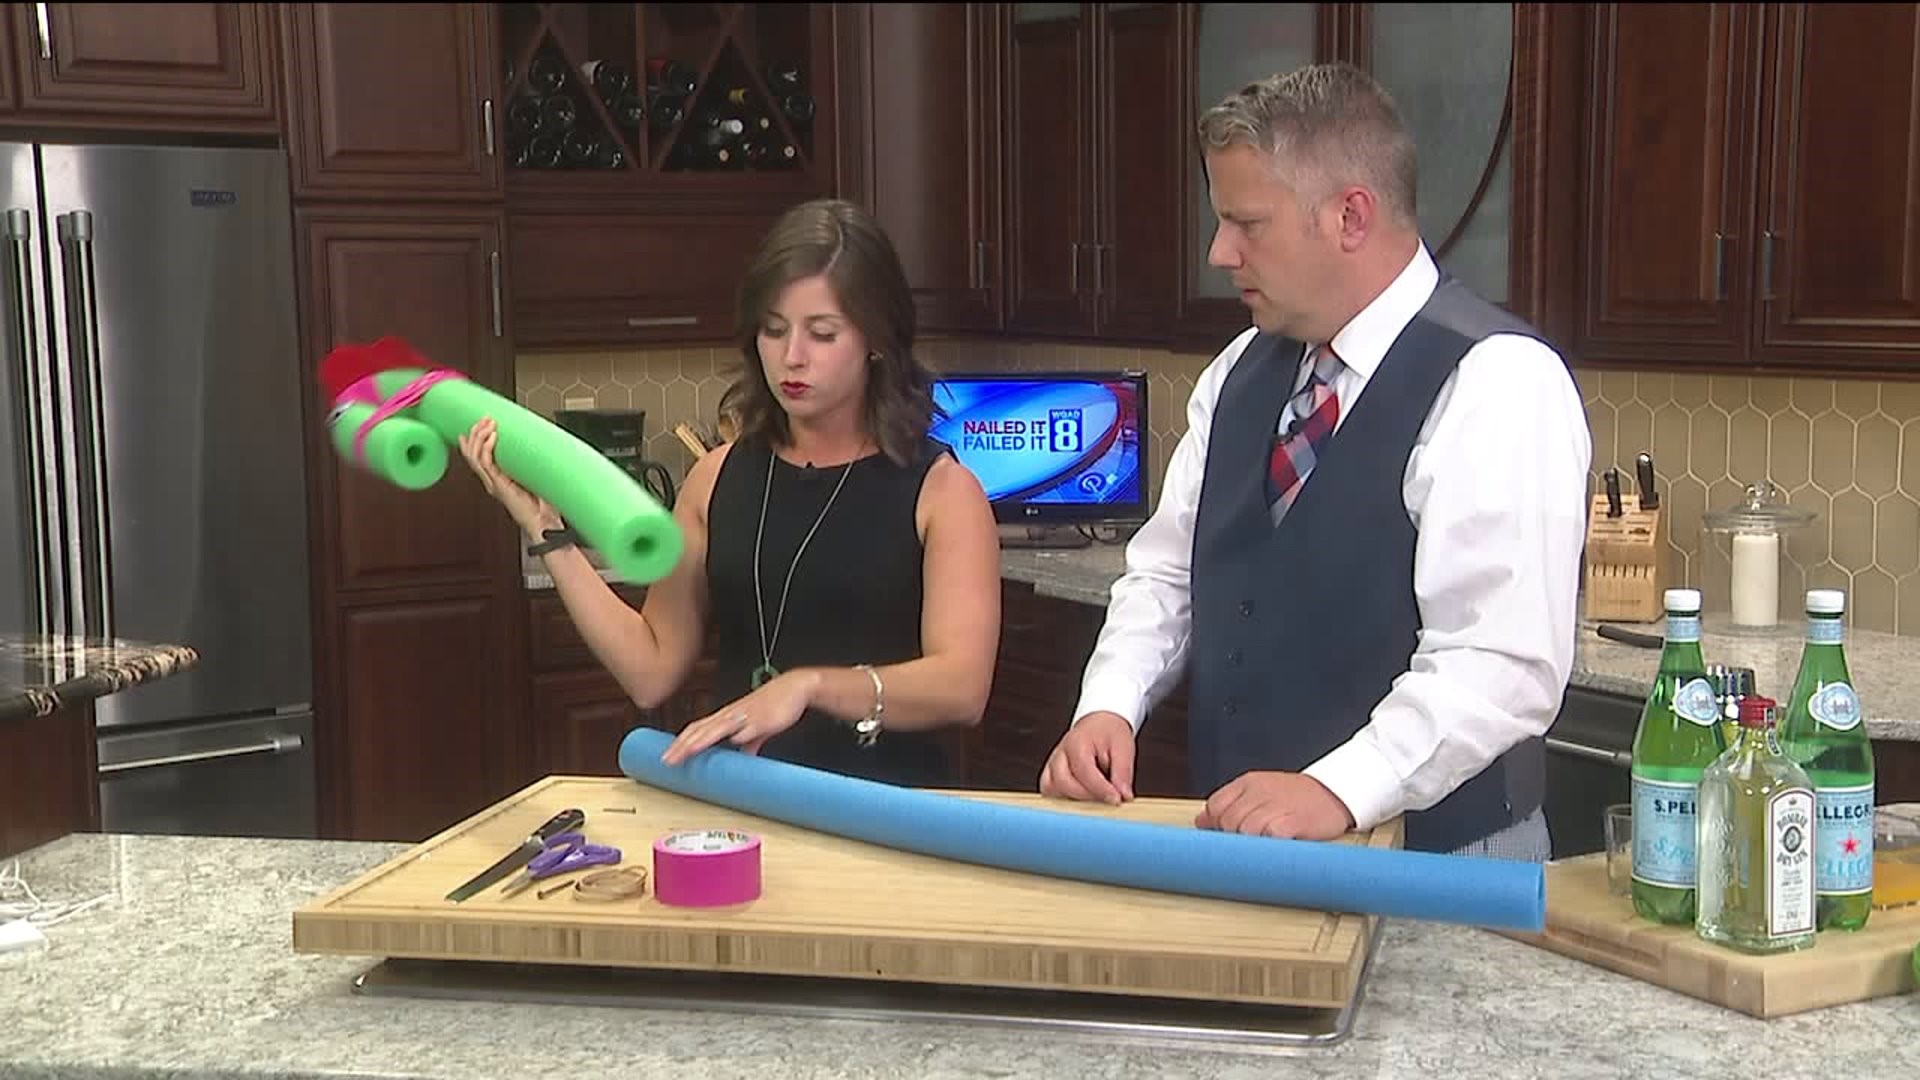 Turning Pool Noodles Into Rockets